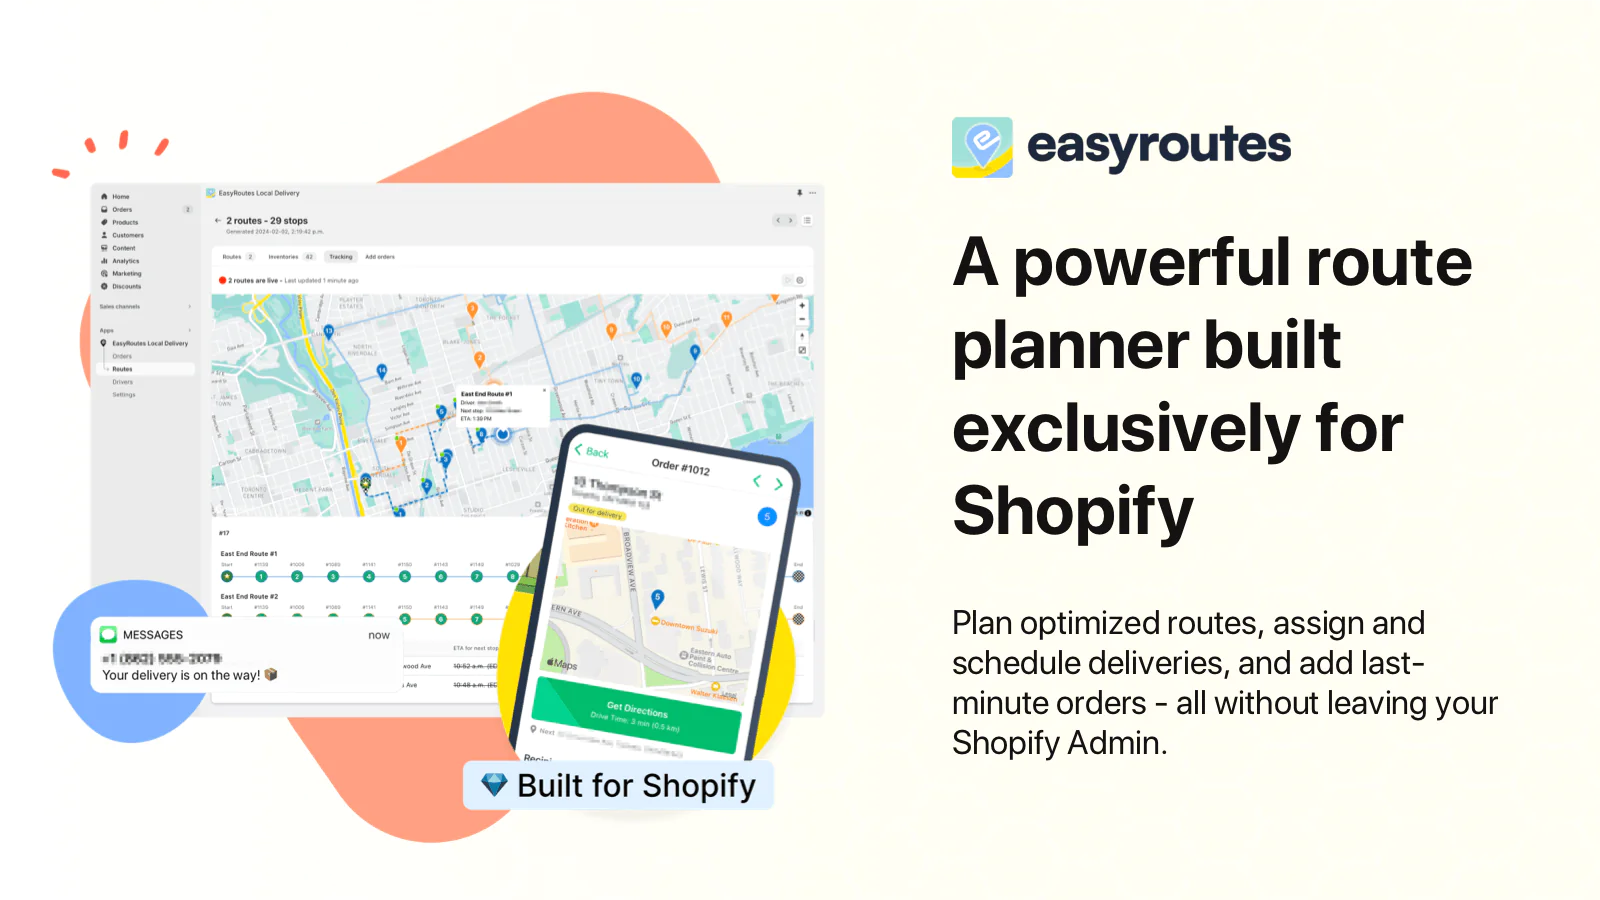 EasyRoutes A powerful route planner built exclusively for Shopify